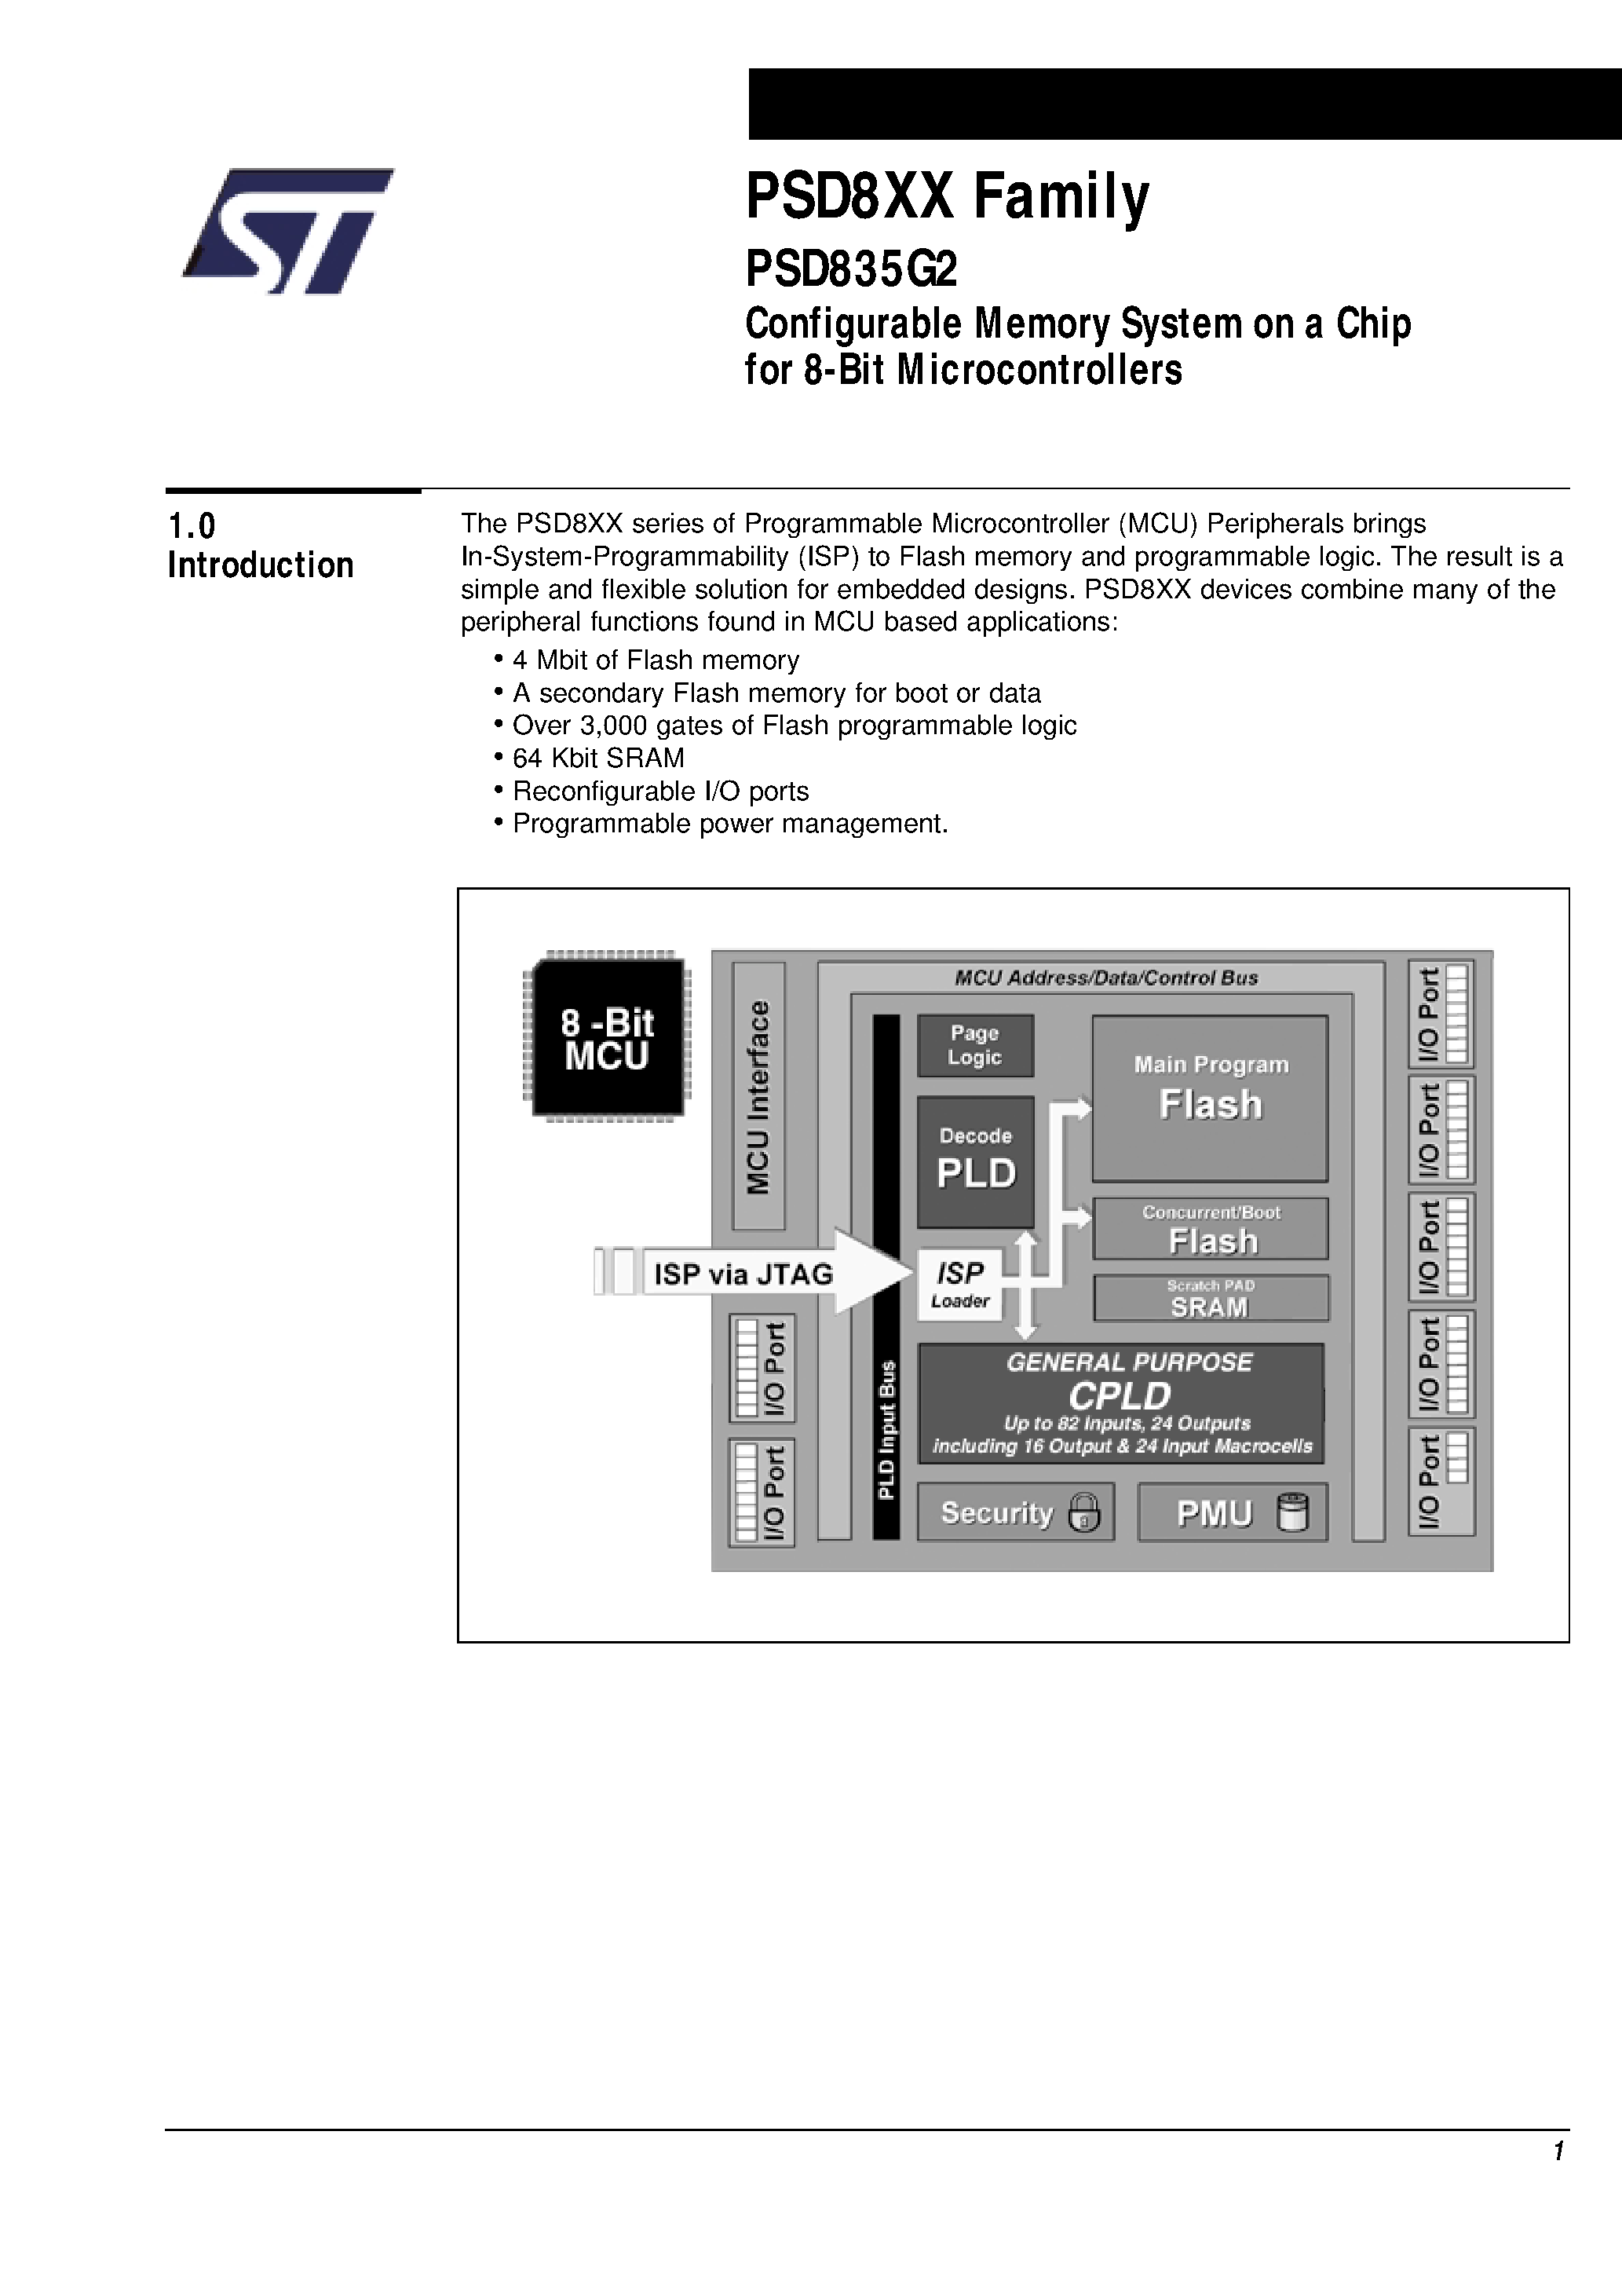 Datasheet PSD835F1V-A-90U - Configurable Memory System on a Chip for 8-Bit Microcontrollers page 2